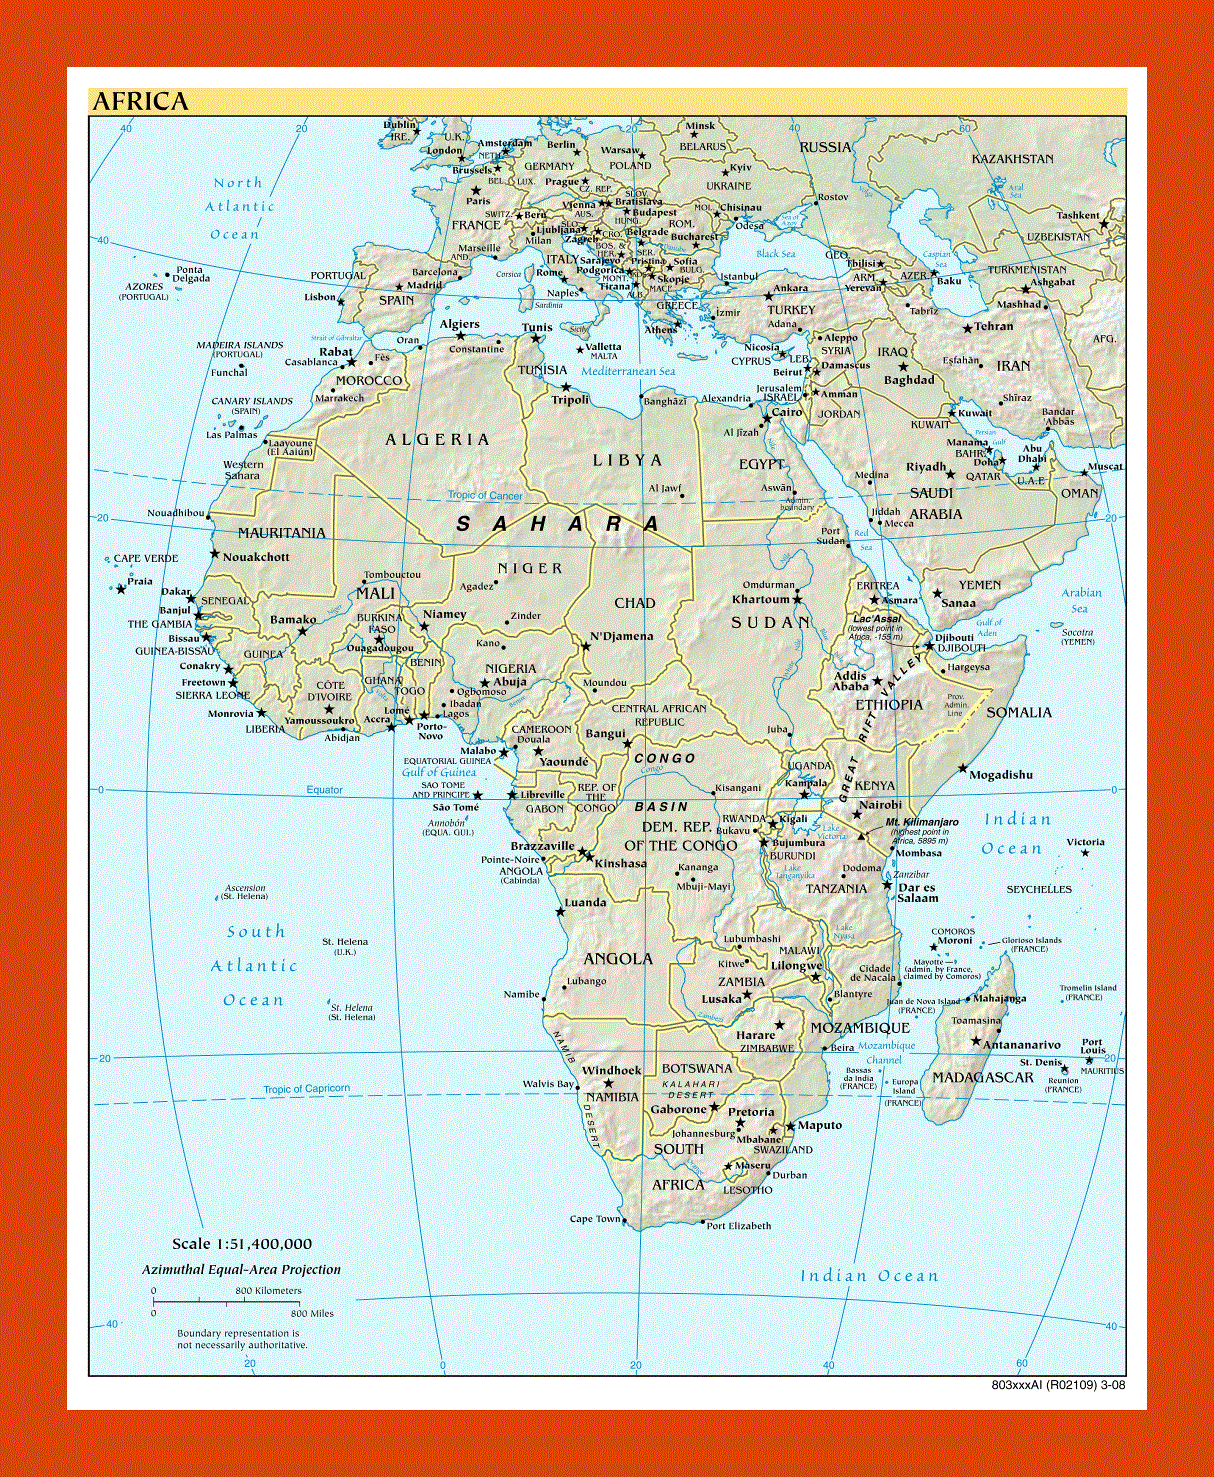 Political map of Africa - 2008